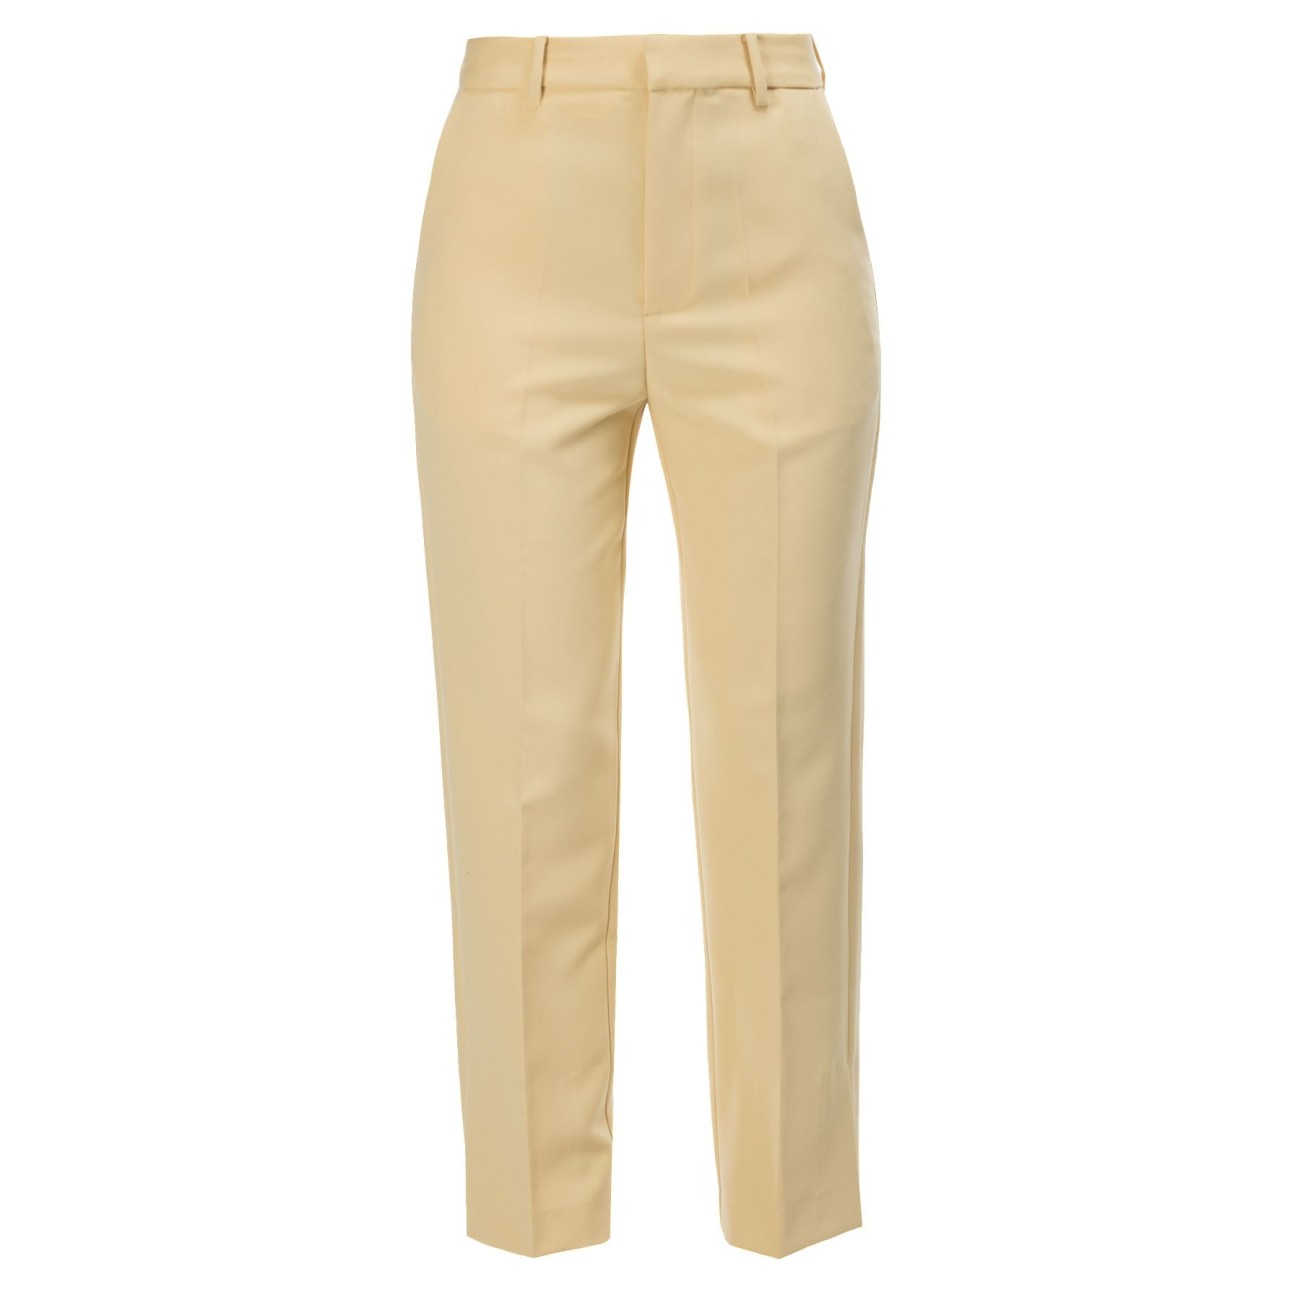 Isabelle Blanche yellow pants